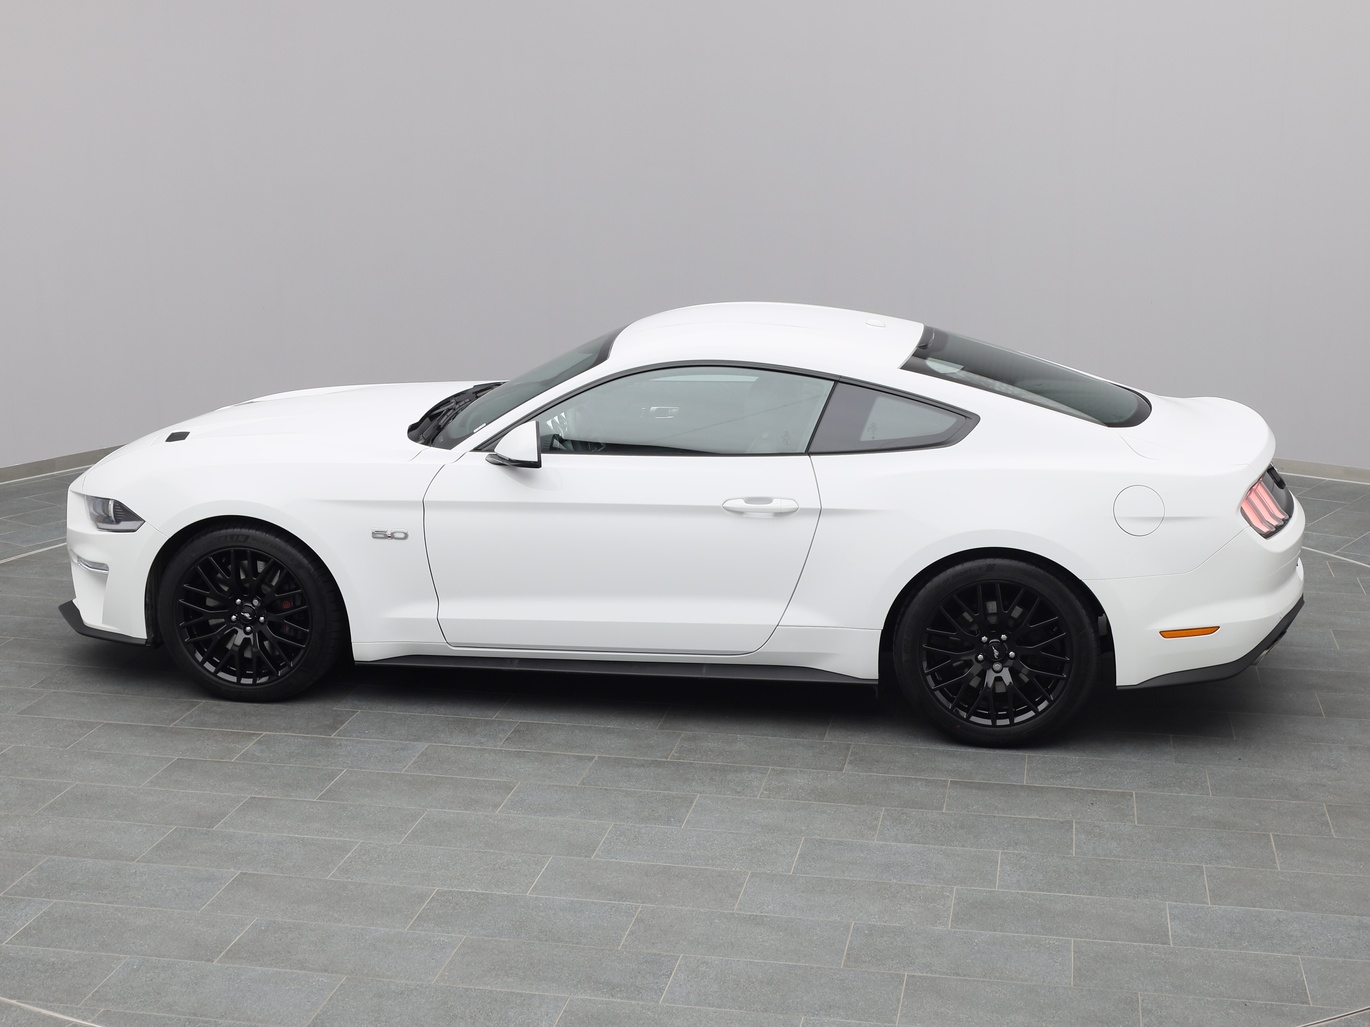  Ford Mustang GT Coupé V8 450PS / Premium 2 / Navi / ACC in Liquid Weiss 